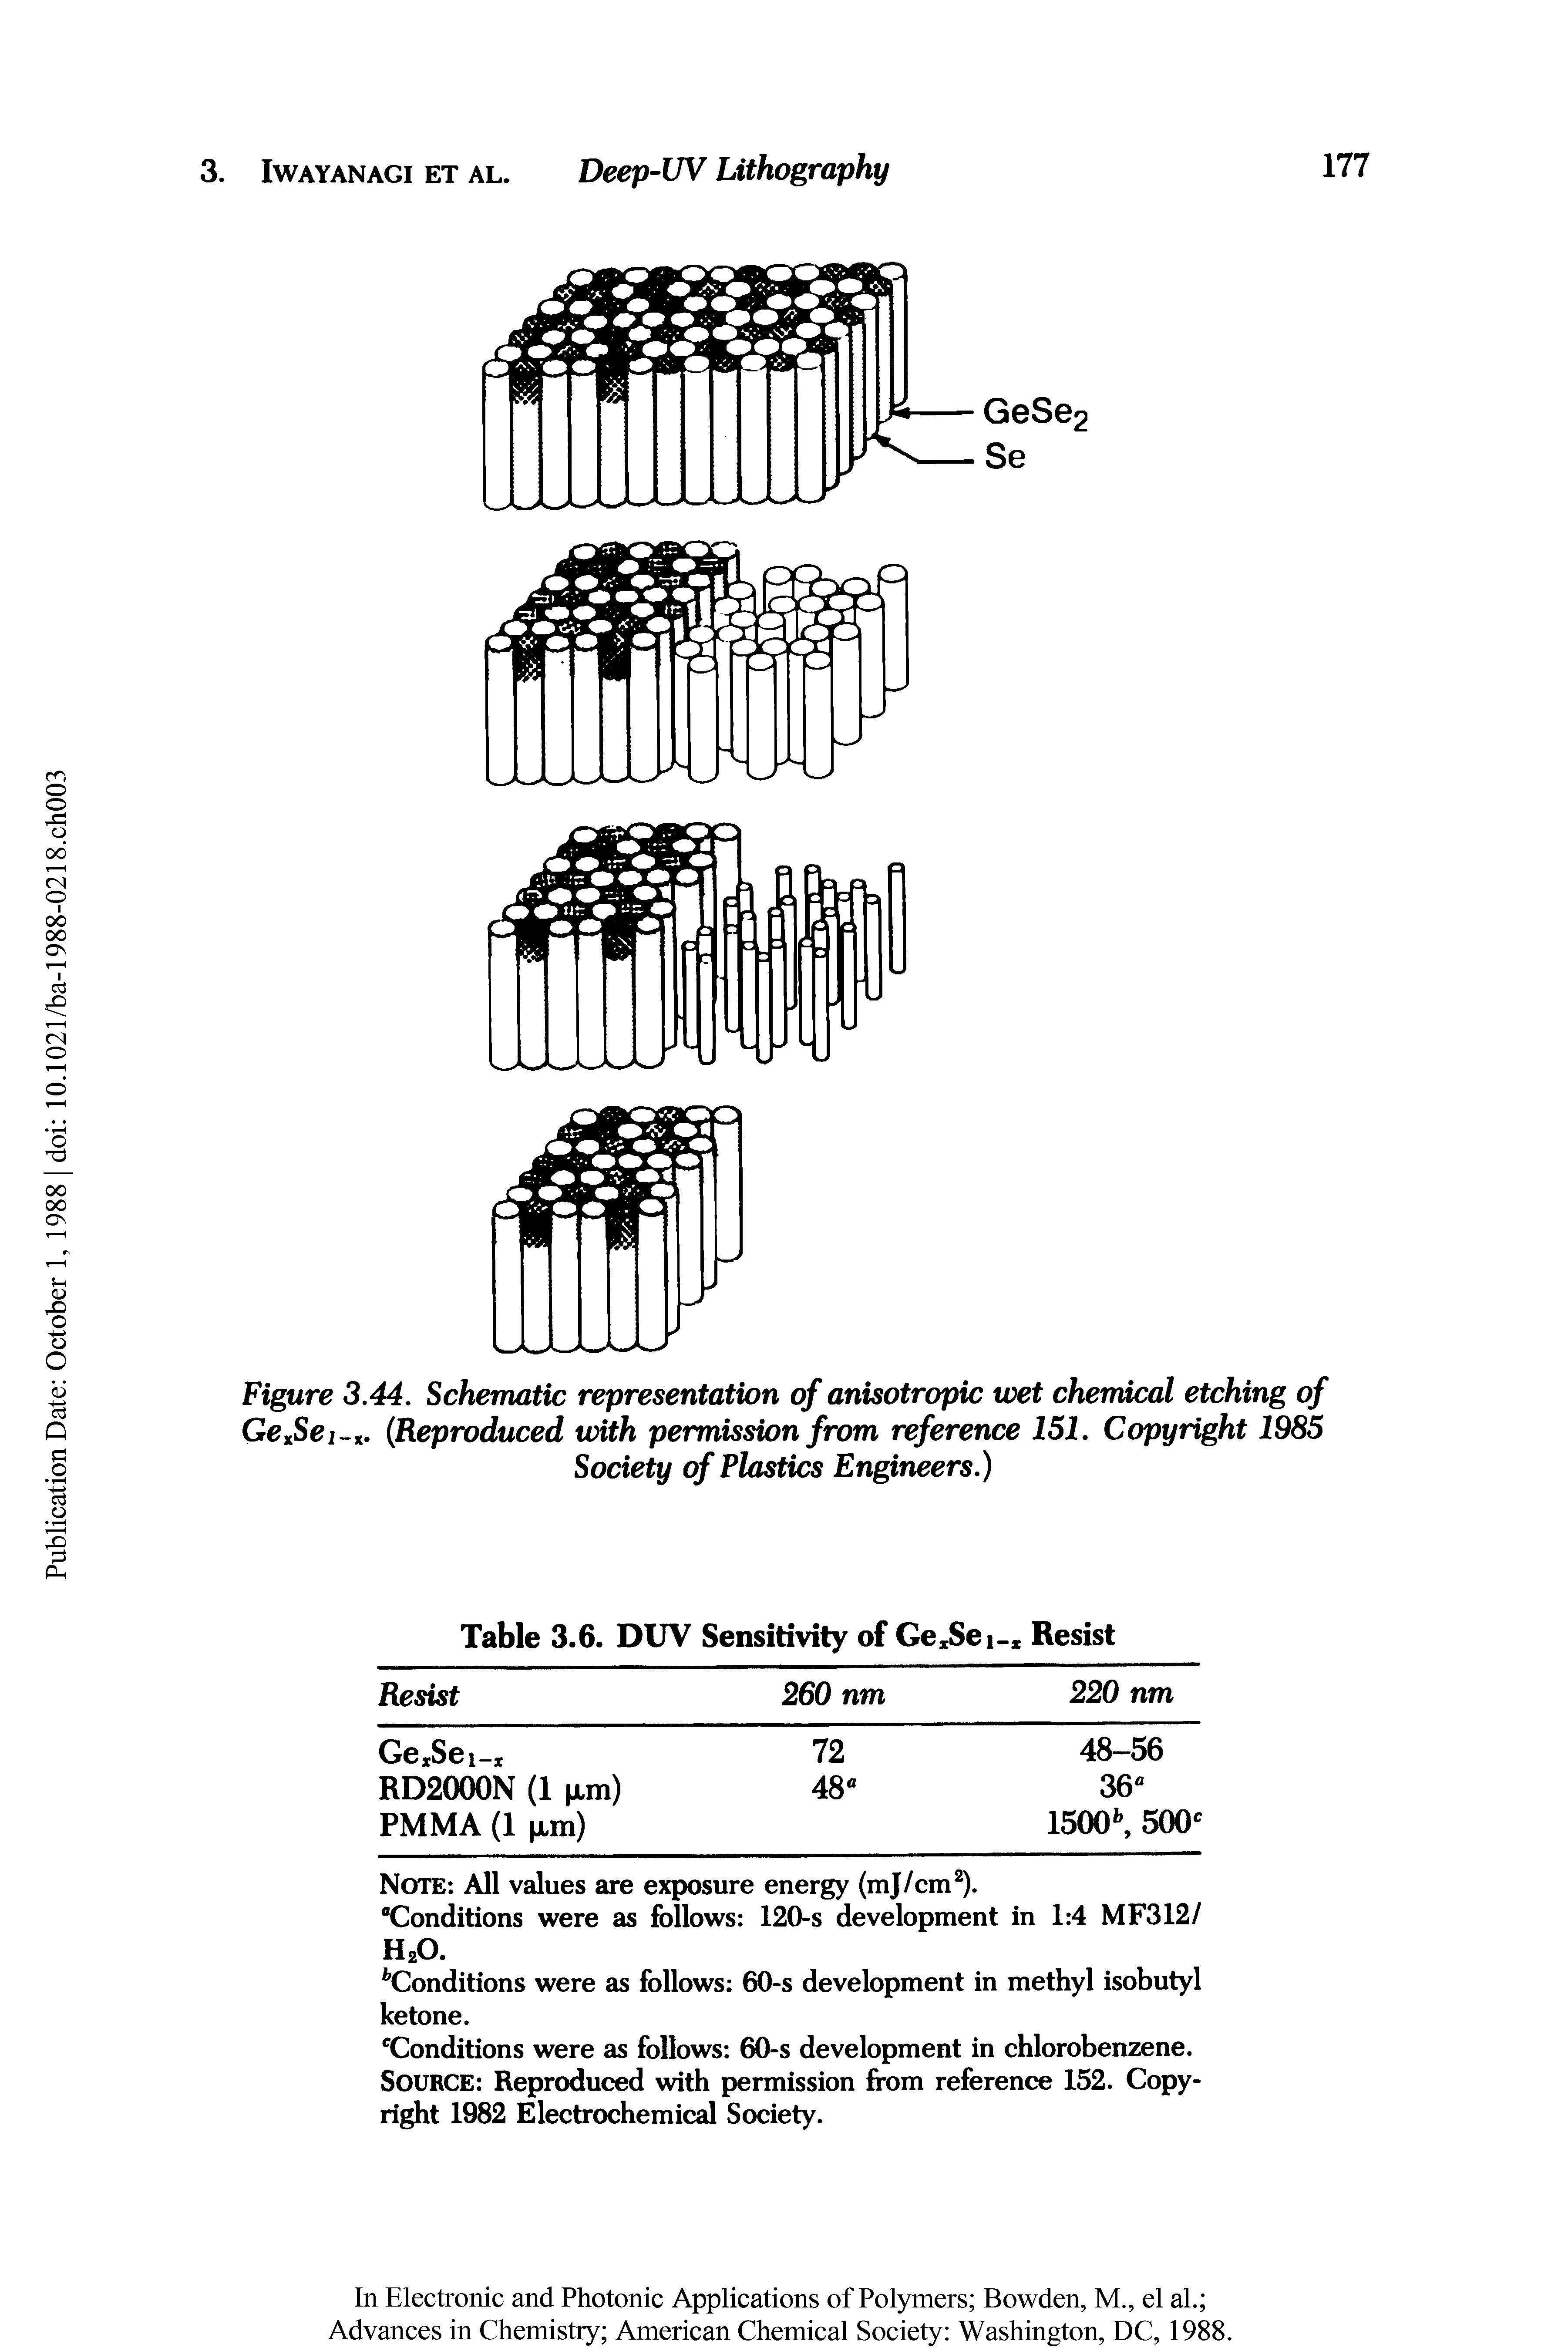 Figure 3.44. Schematic representation of anisotropic wet chemical etching of GcxSei x- Reproduced with permission from reference 151. Copyright 1985 Society of Plastics Engineers.)...